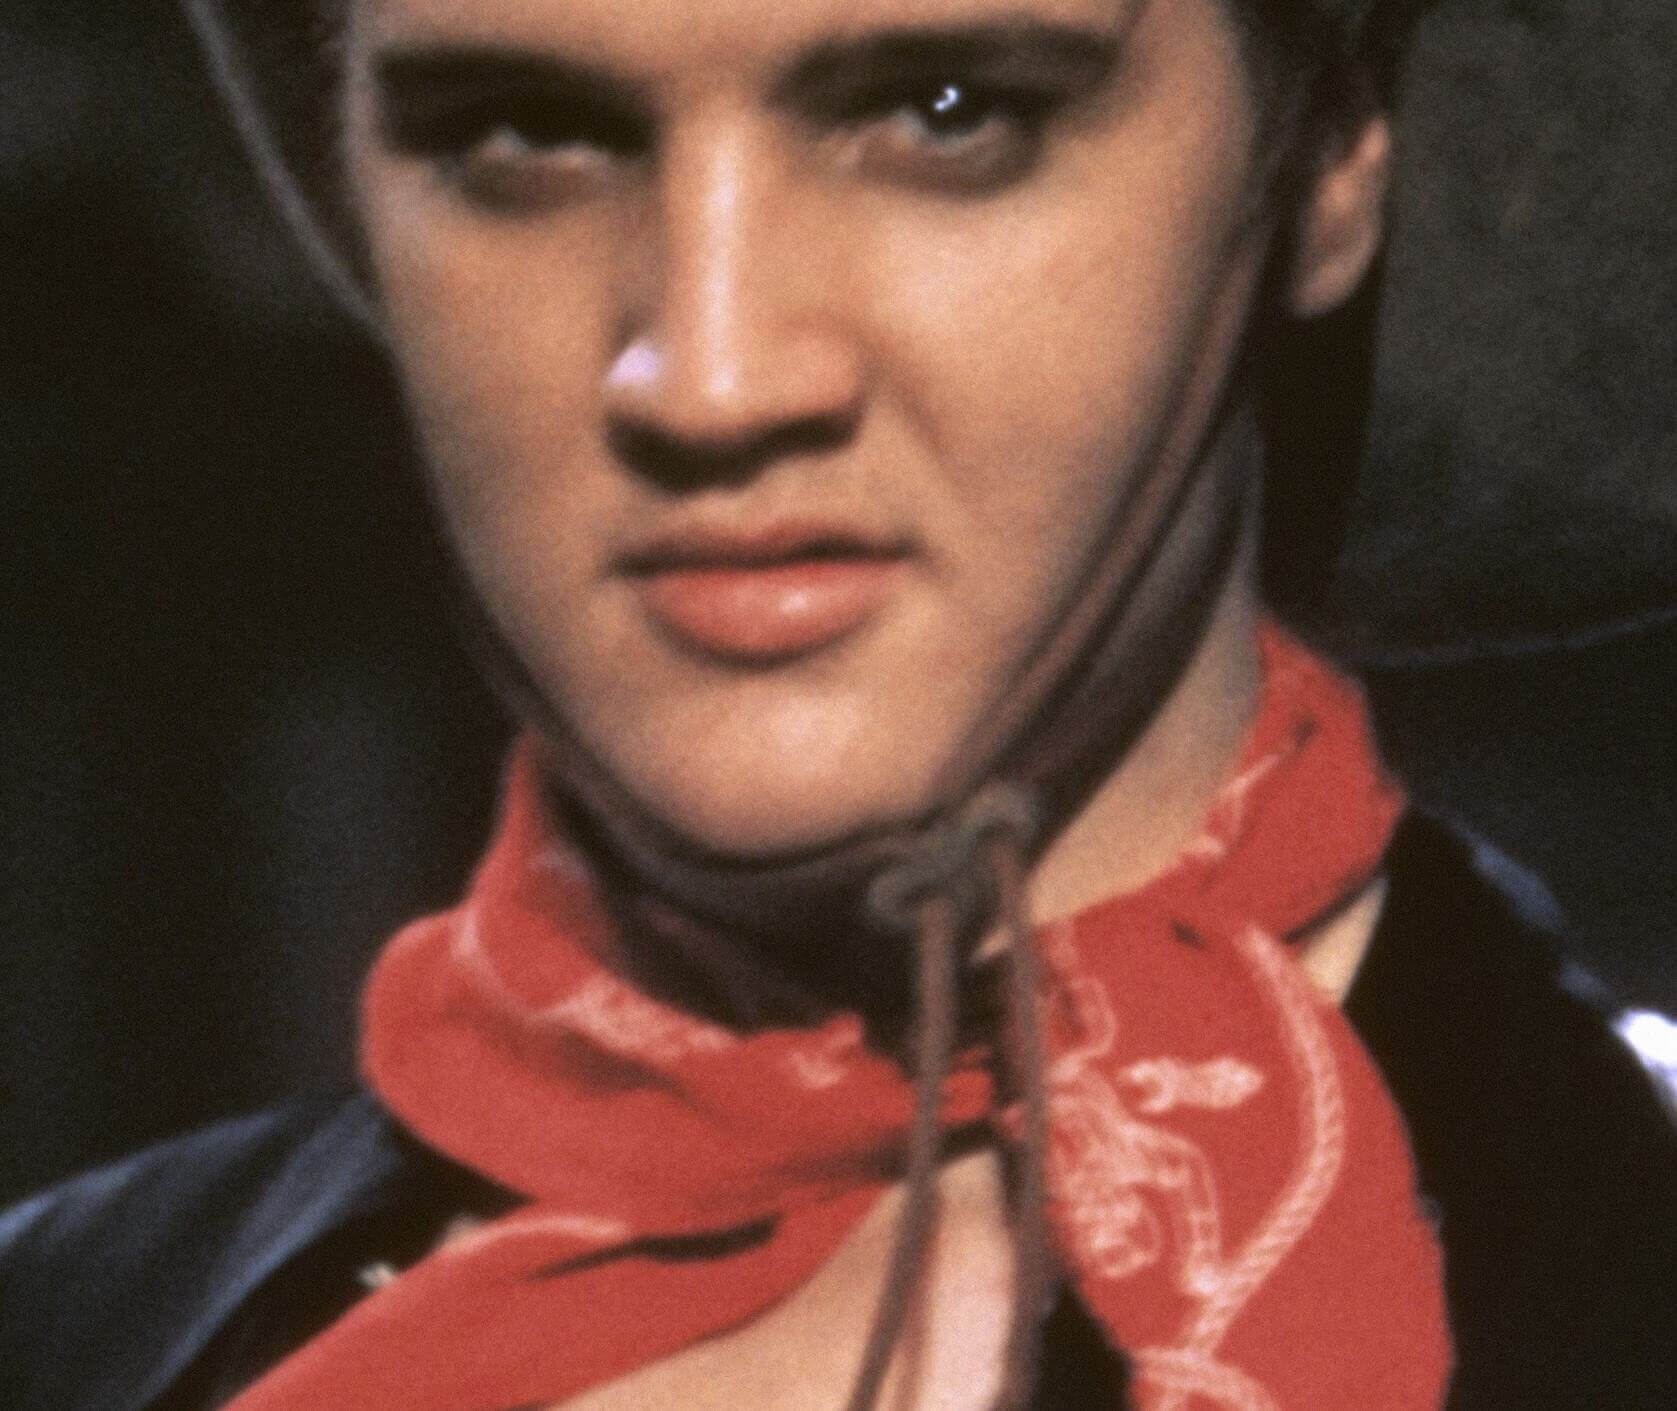 "She's Not You" singer Elvis Presley wearing an ascot